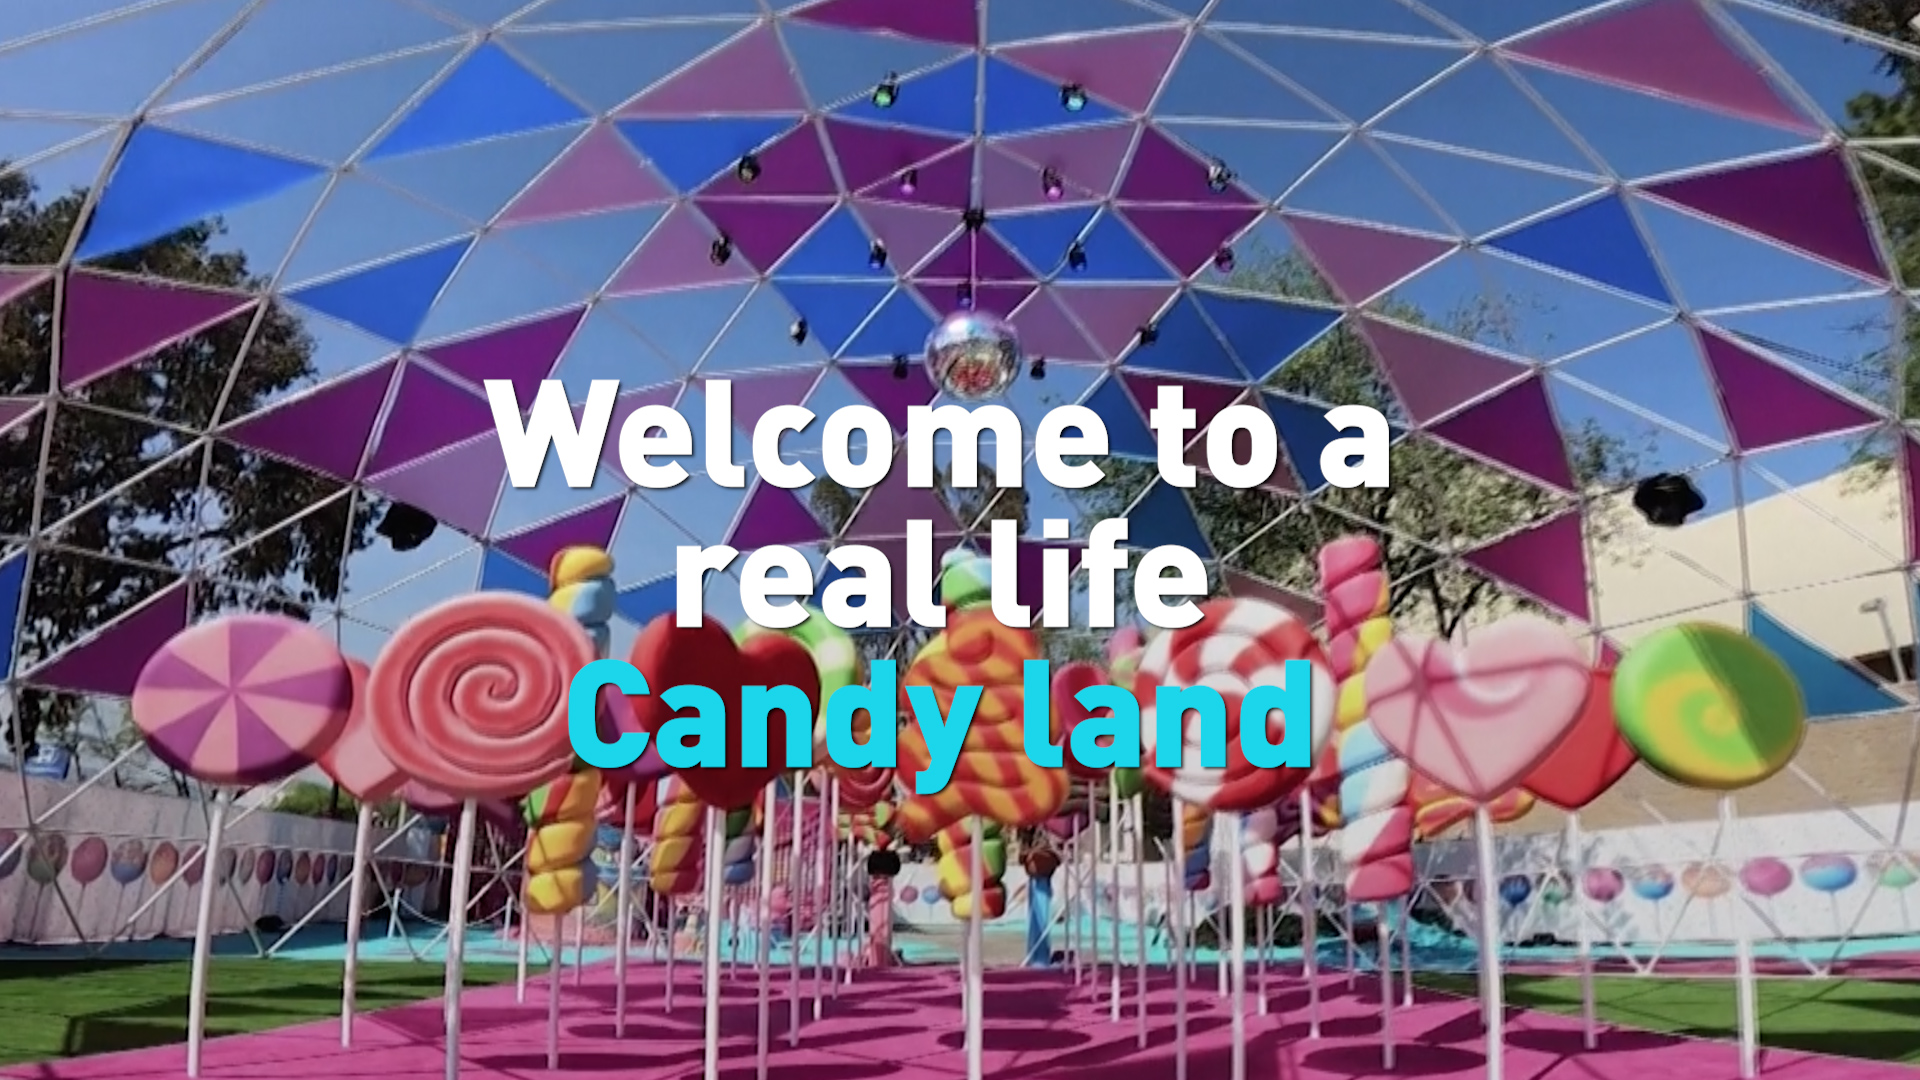 Candy land” in real life: Sugar rush theme park opens in California - CGTN